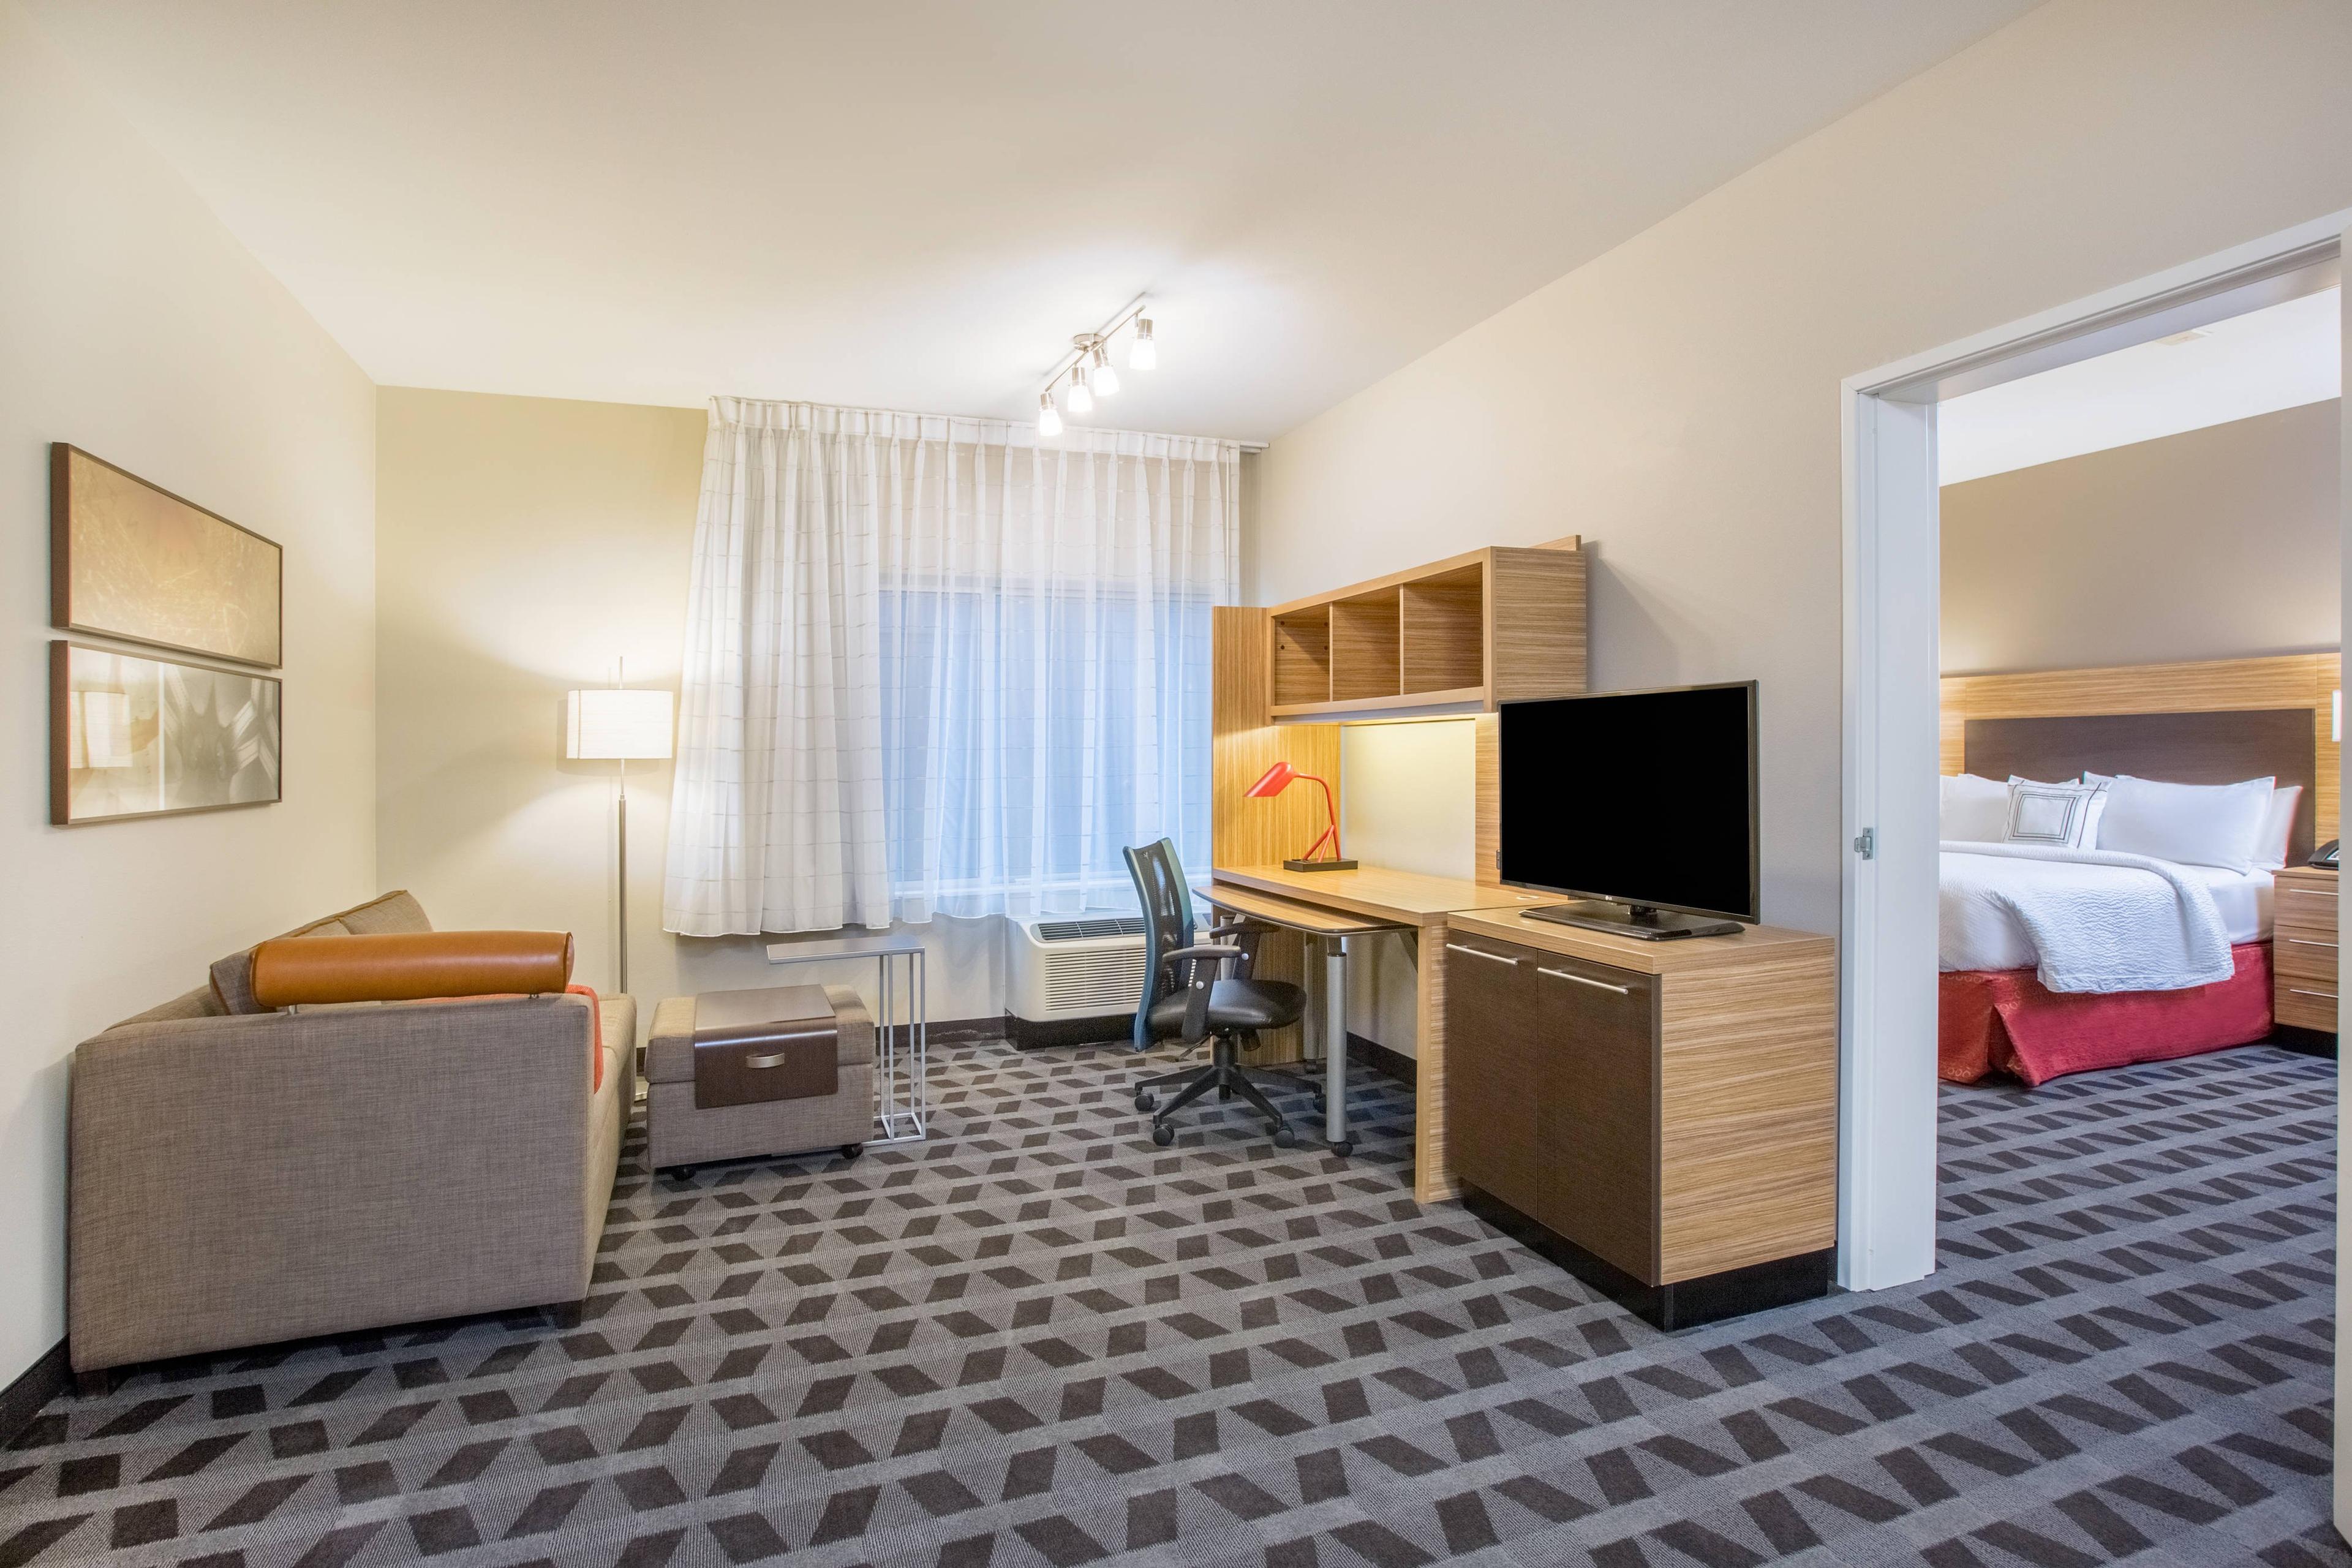 Spread out and relax in a newly refreshed One-Bedroom Queen Suite, offering separate living and sleeping areas so you can work or relax without any distractions. A full kitchen is also featured for when you’re ready to refuel.